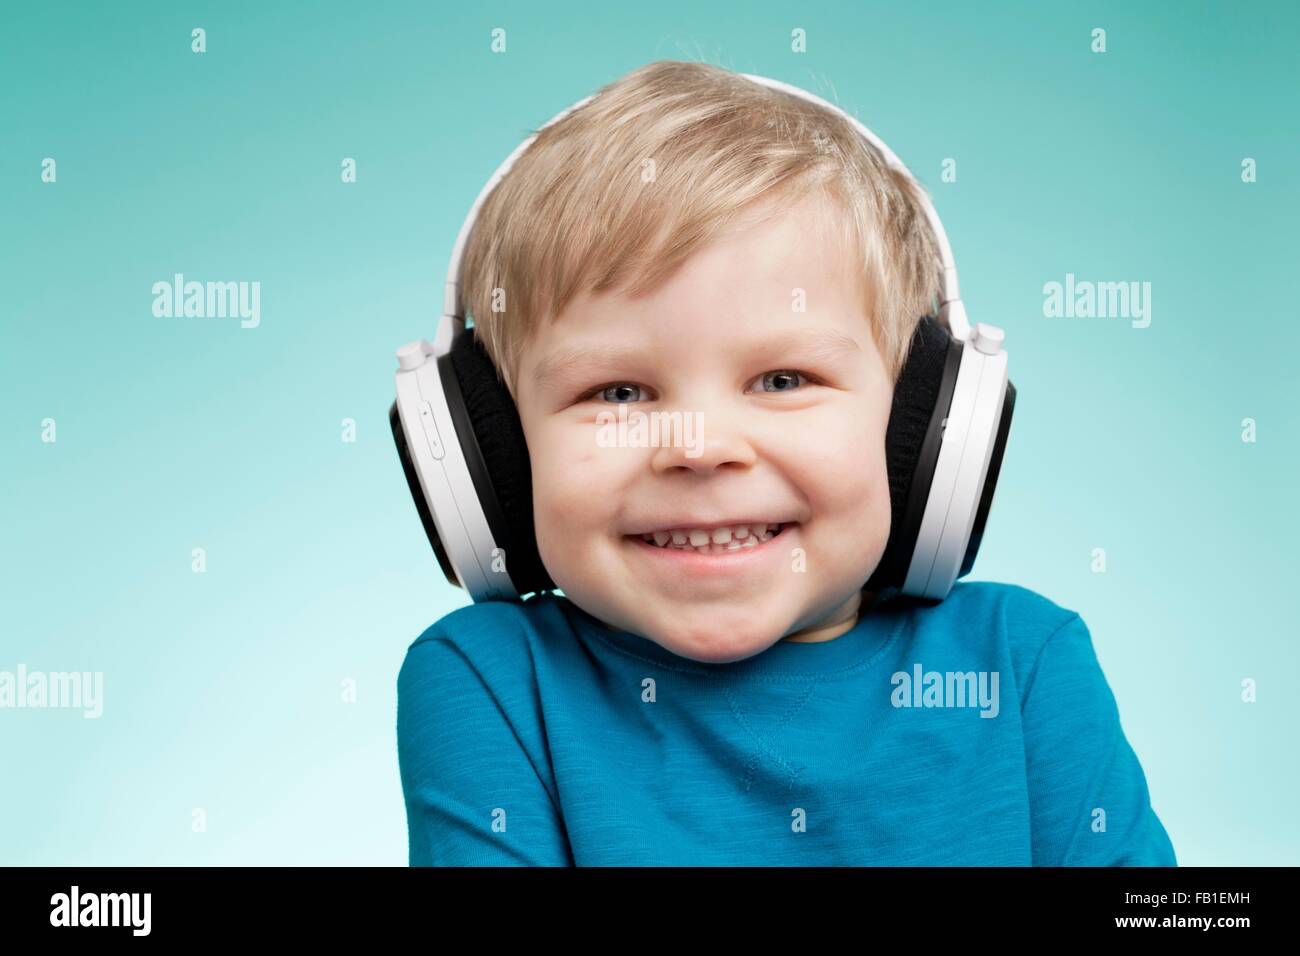 Little Boy wearing headphones and smiling Banque D'Images